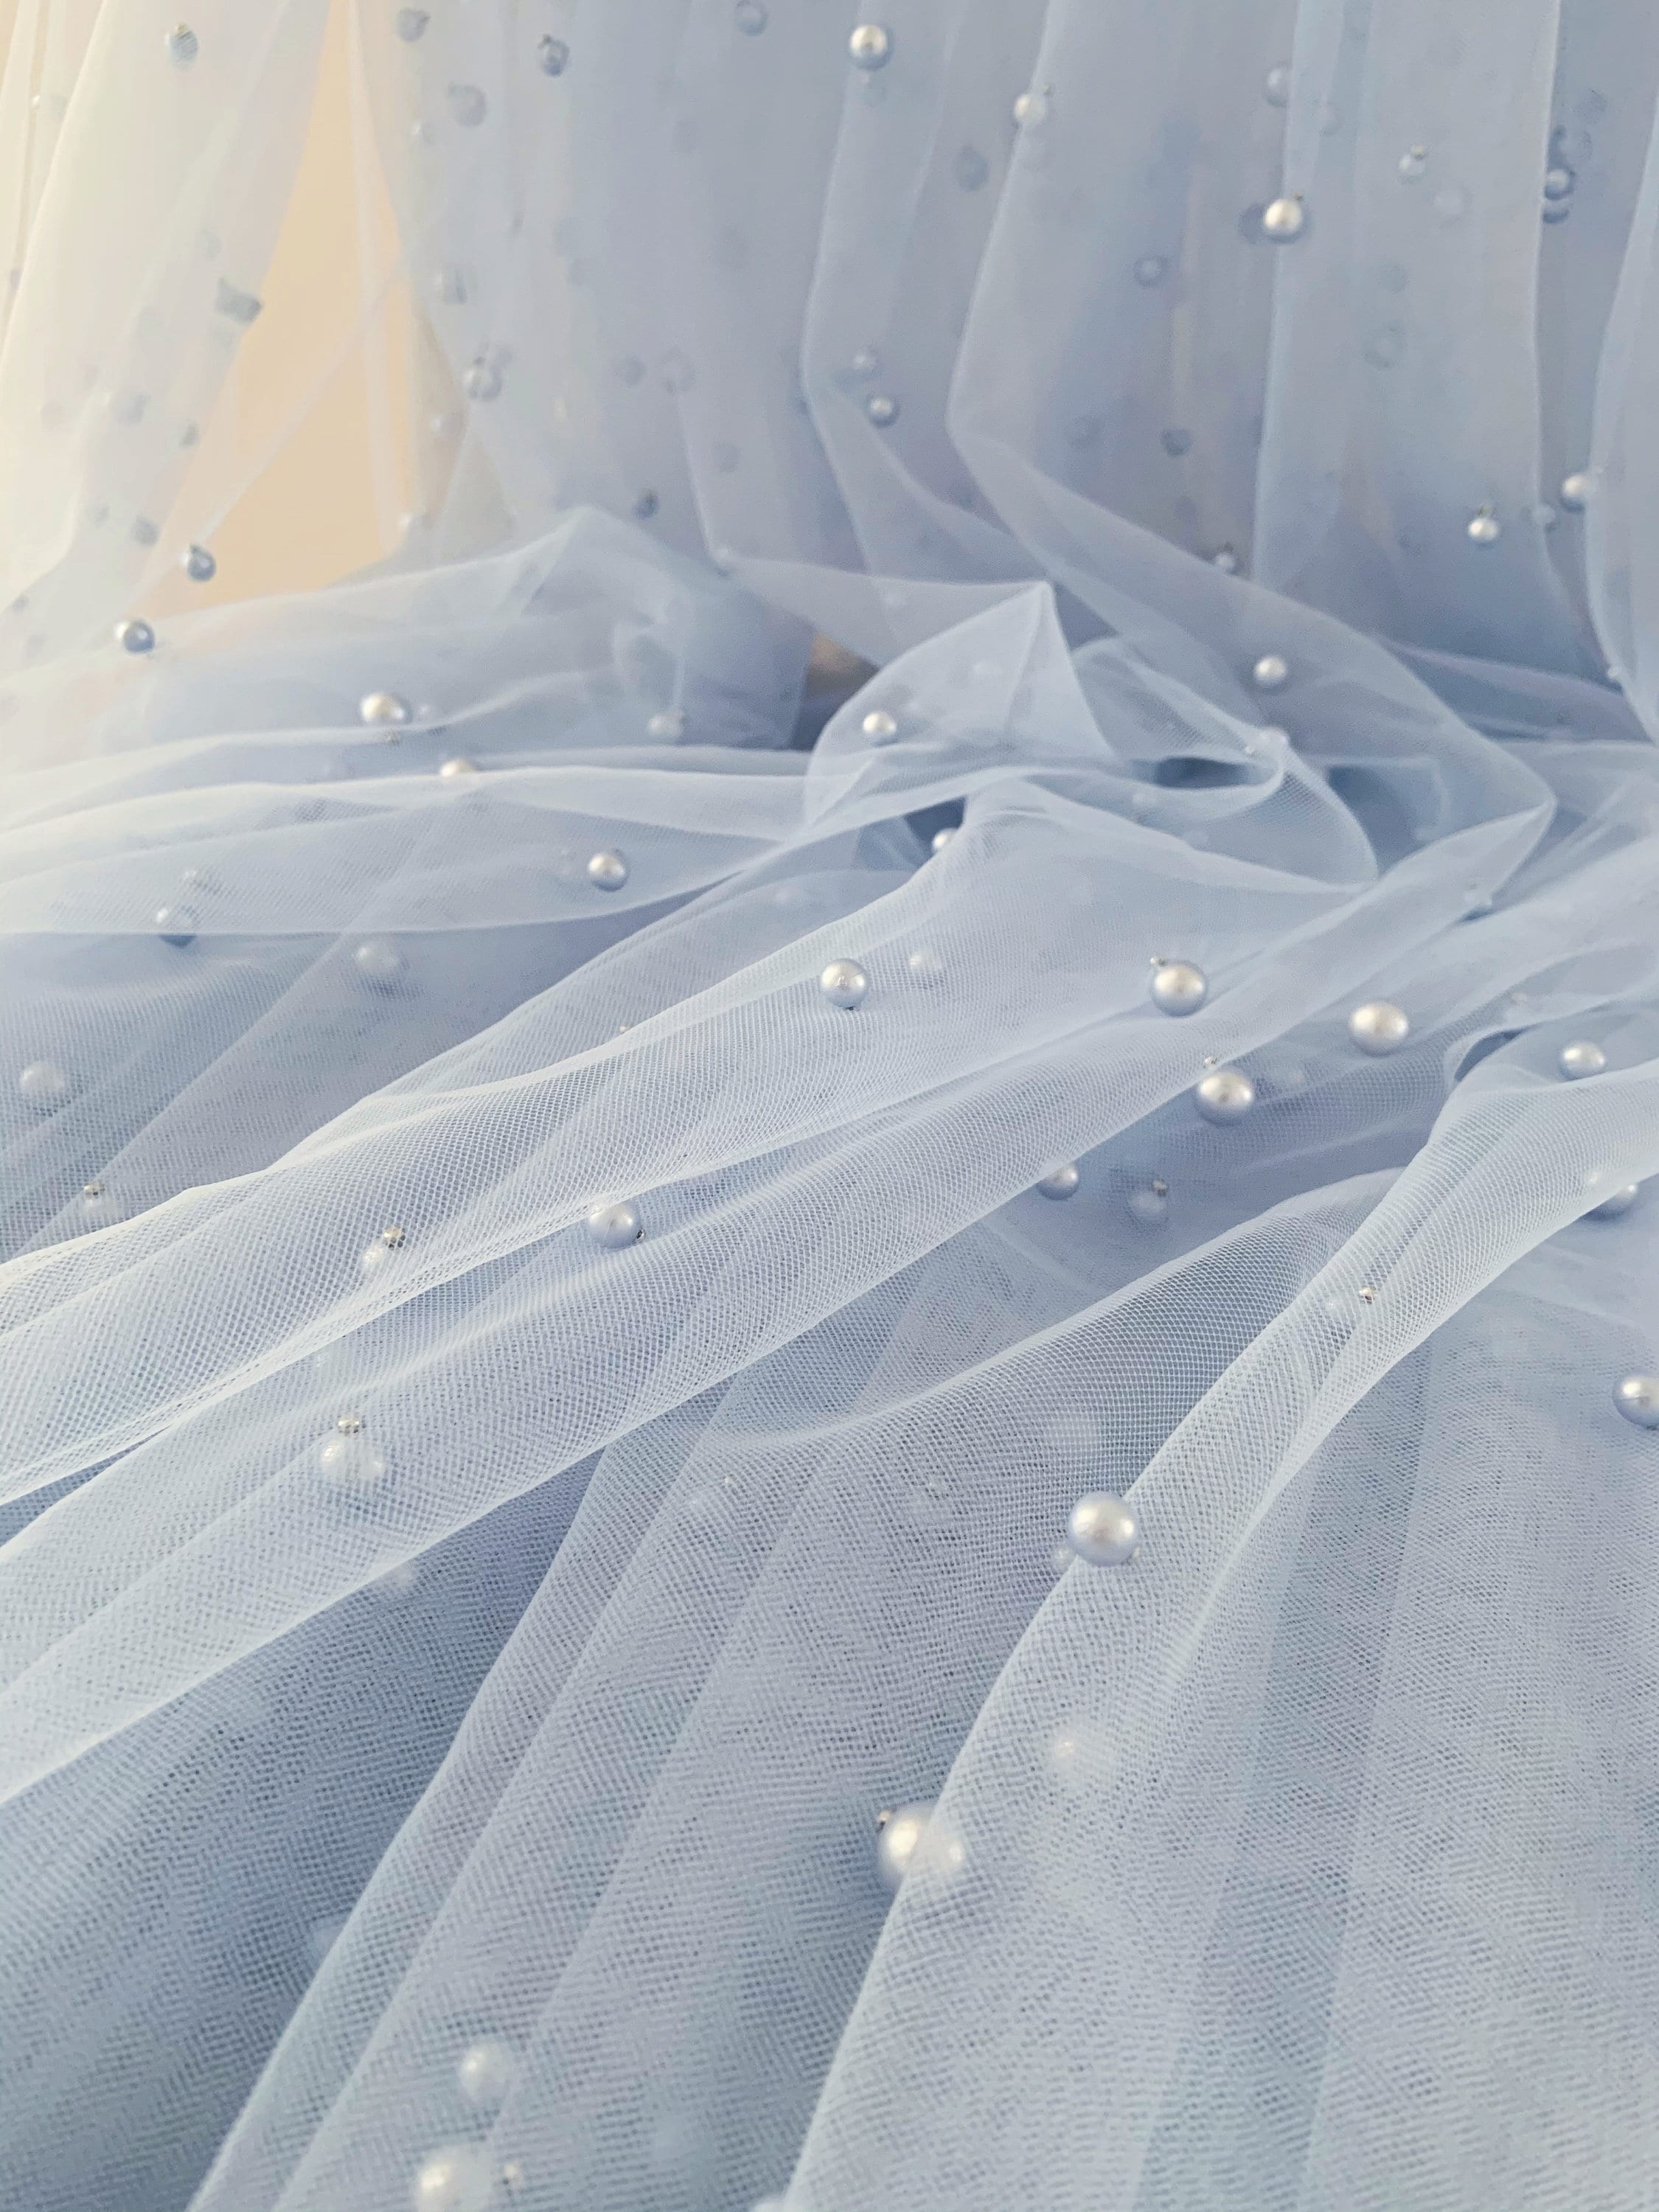 Baby Blue Pearl Tulle Fabric, Sky Blue Pearl Beaded Tulle, Light Blue  Beaded Pearl Tulle Lace Fabric by the Yard, Tulle Mesh With Pearls -   Norway